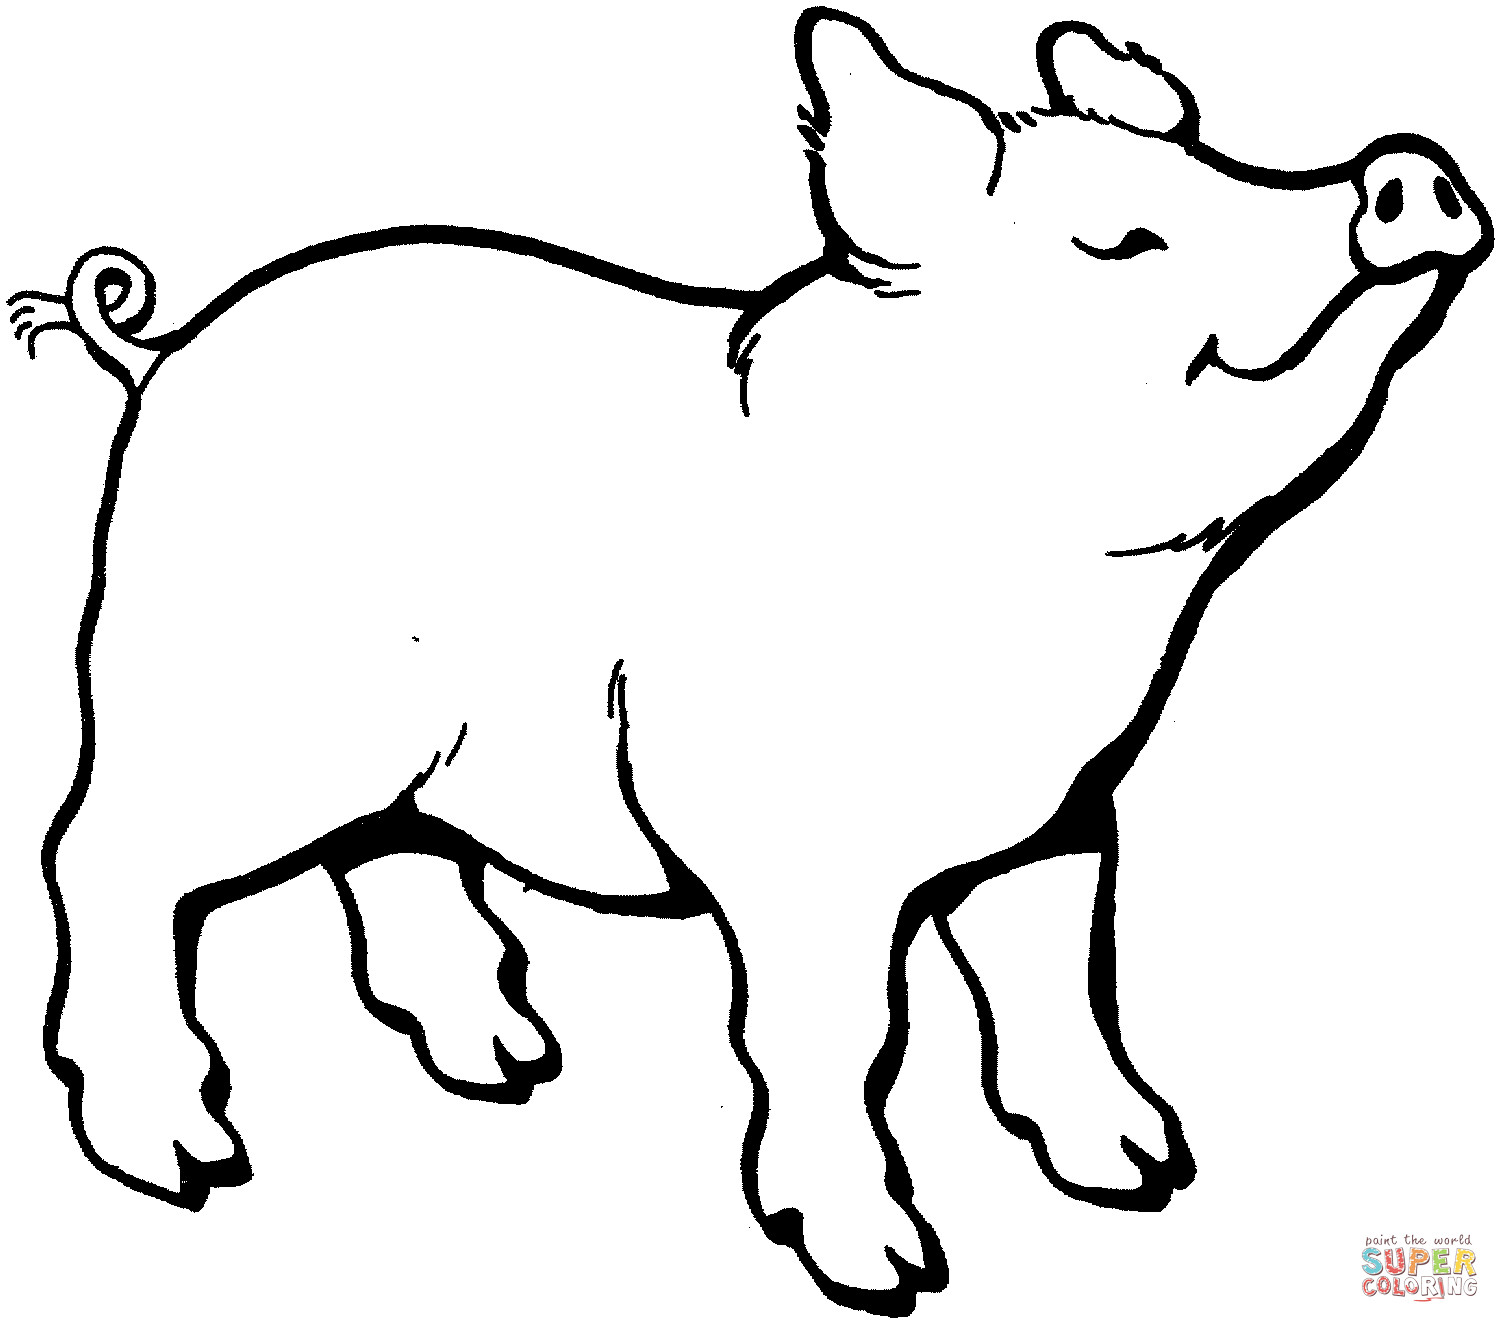 Pigs Coloring Pages
 Pig Smells Something coloring page